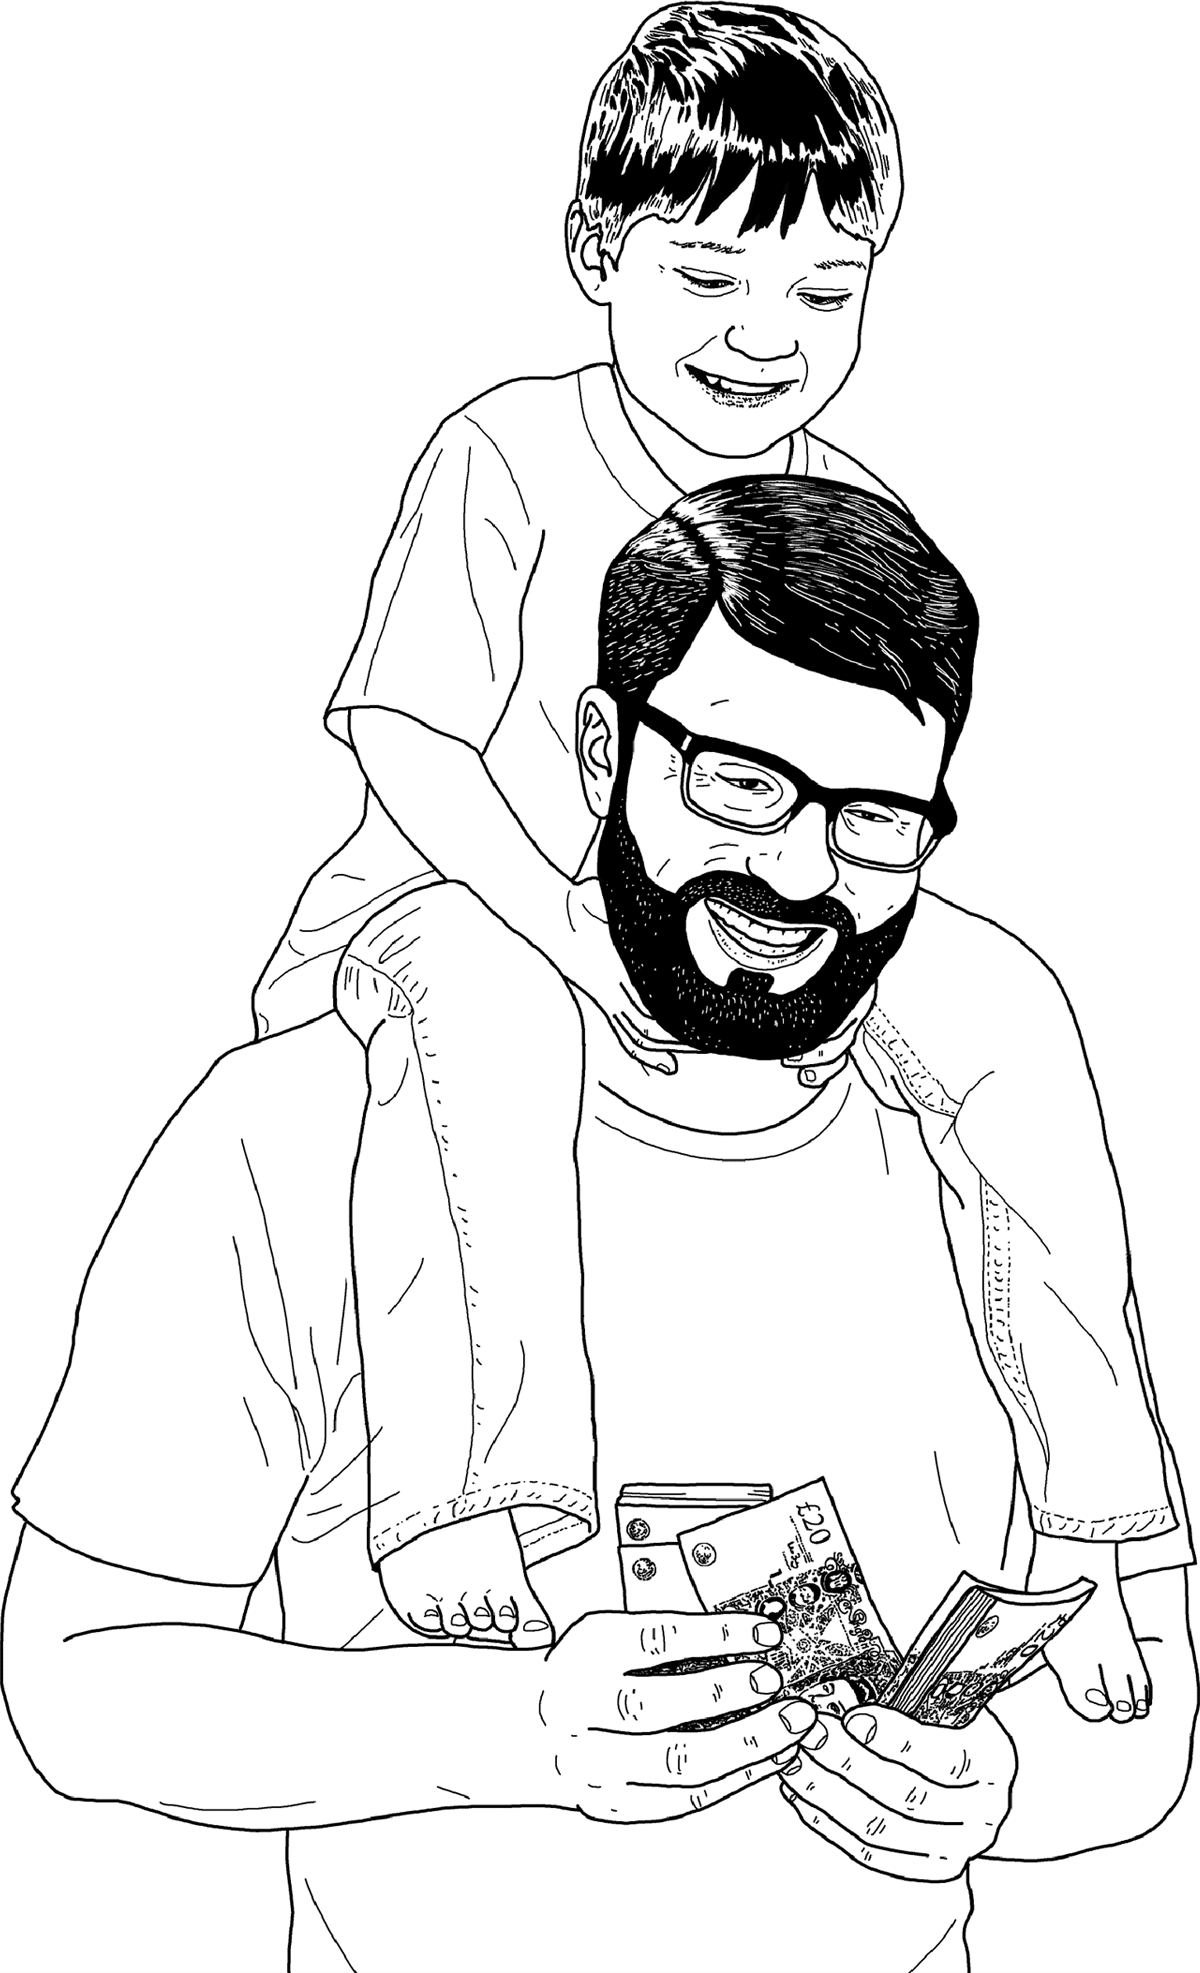 Father with his child on his shoulders